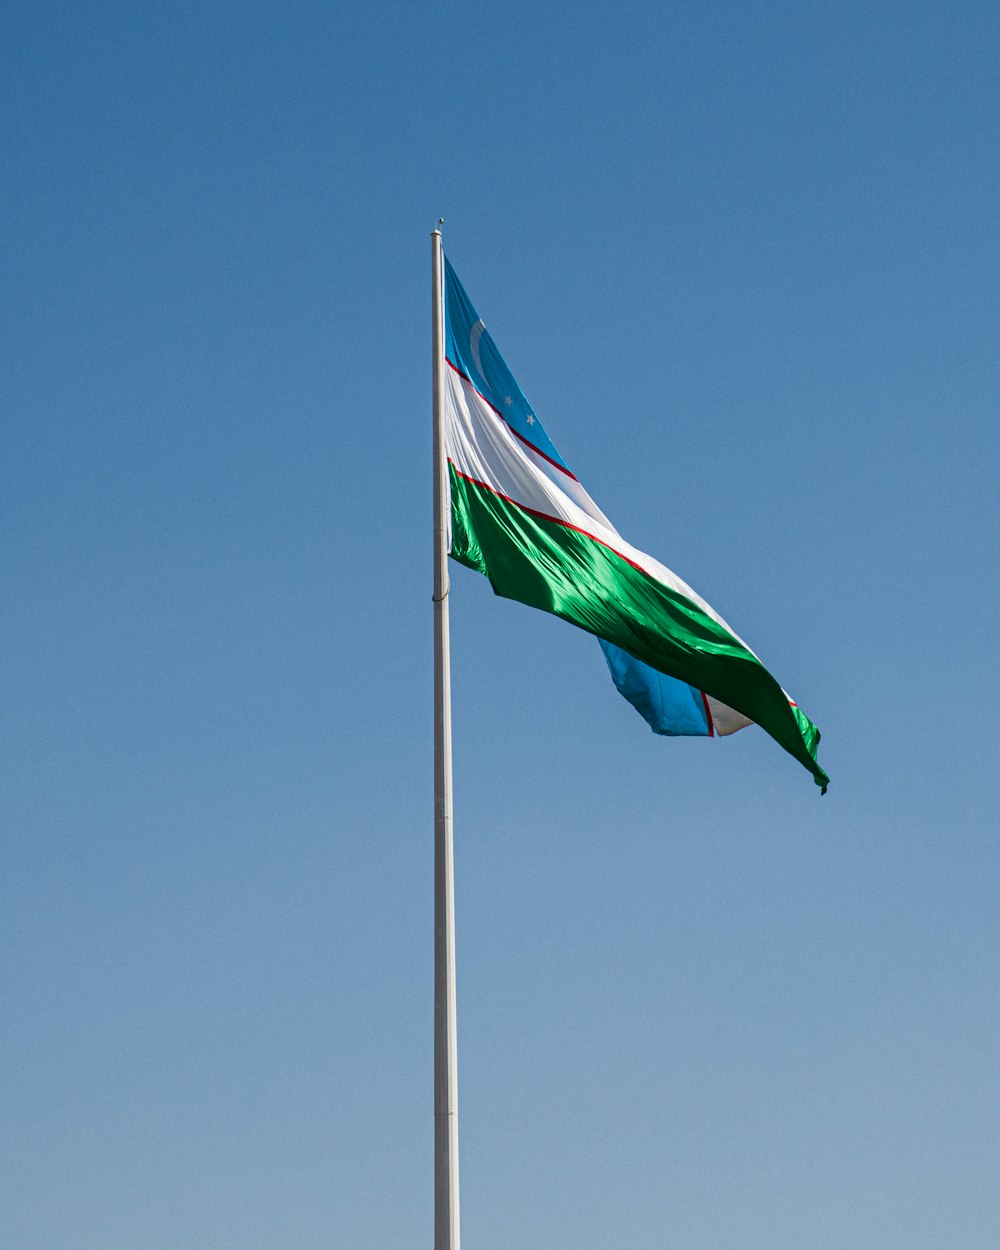 green and white flag under blue sky during daytime